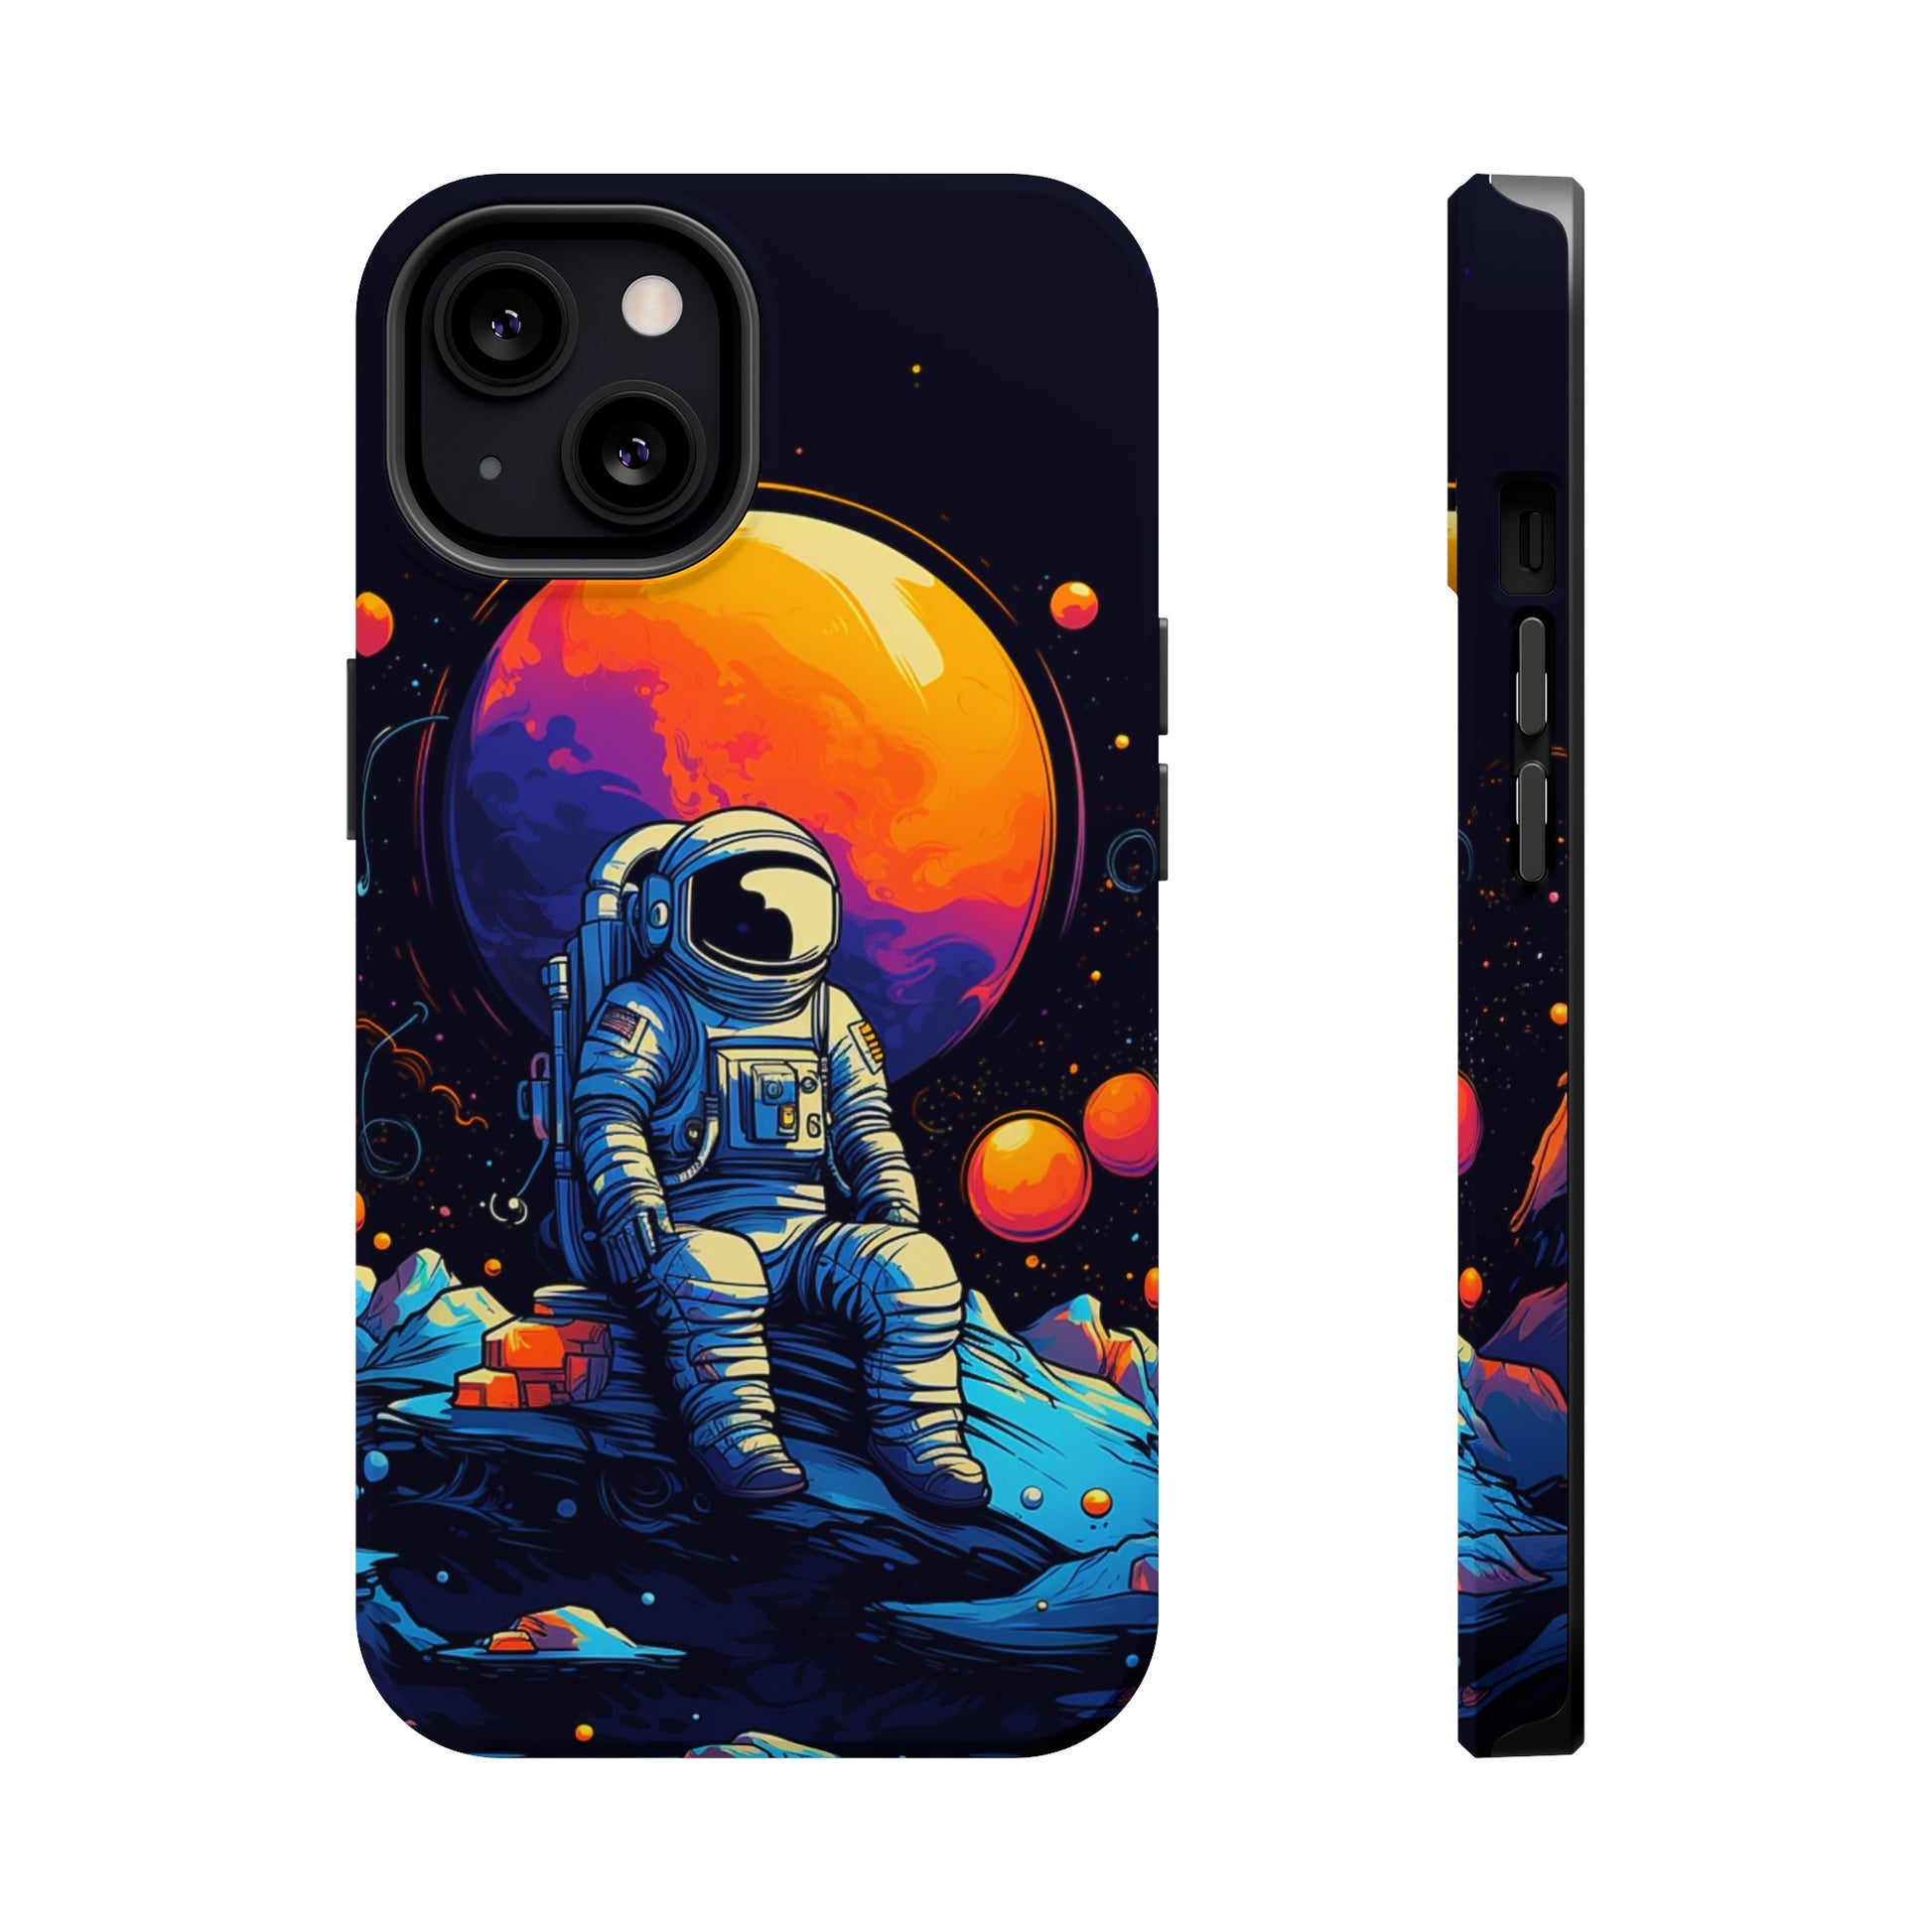 Galactic Solitude (iPhone MagSafe Case)Galactic Solitude MagSafe Durable Case: Style Meets Protection 📱✨
Upgrade your device with Rima Gallery's Galactic Solitude MagSafe Durable Case. This case isn’t juRimaGallery